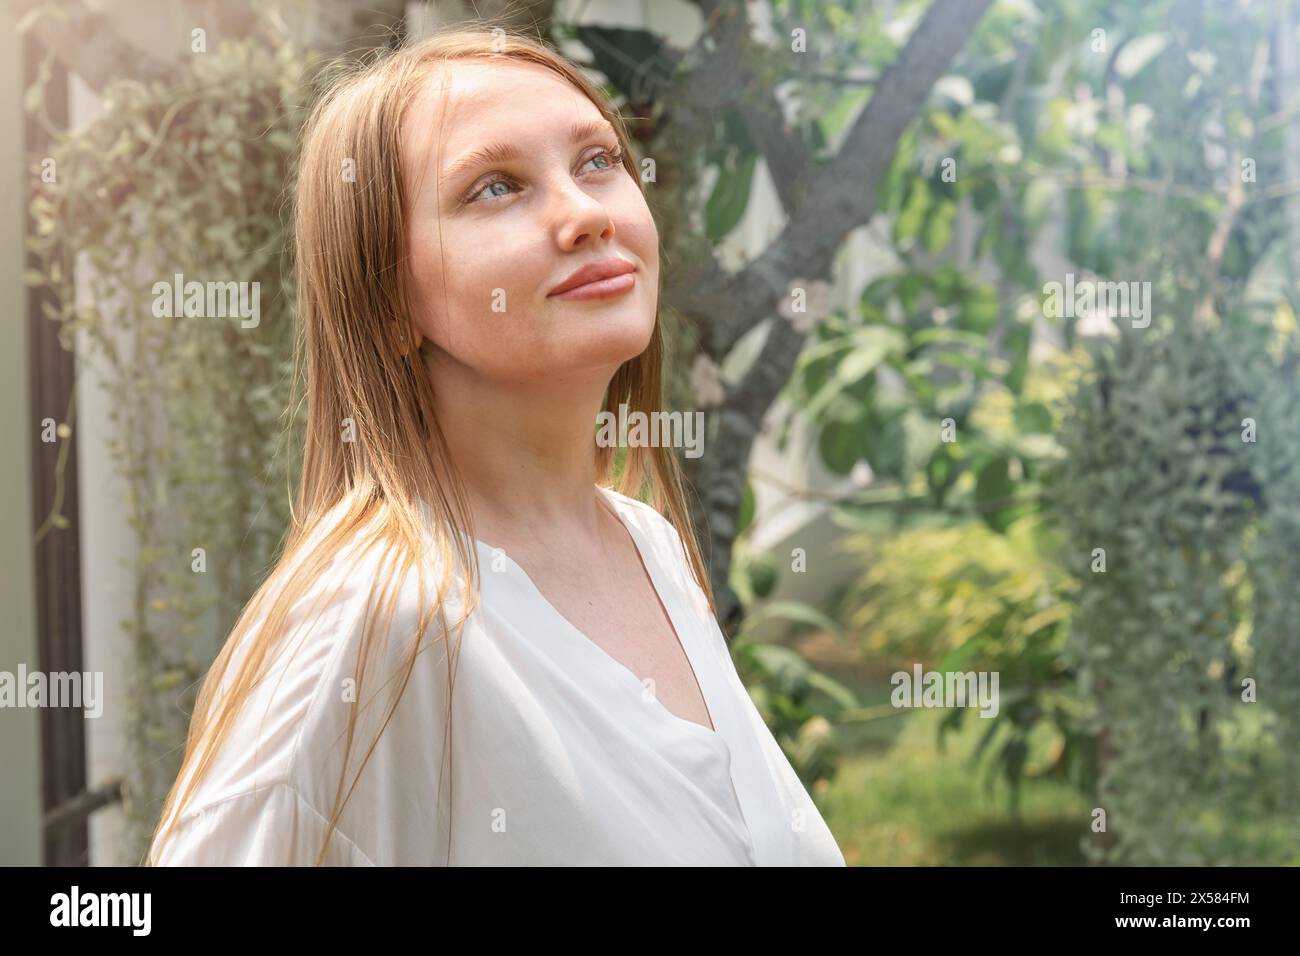 portrait of a cute young woman in the garden Stock Photo